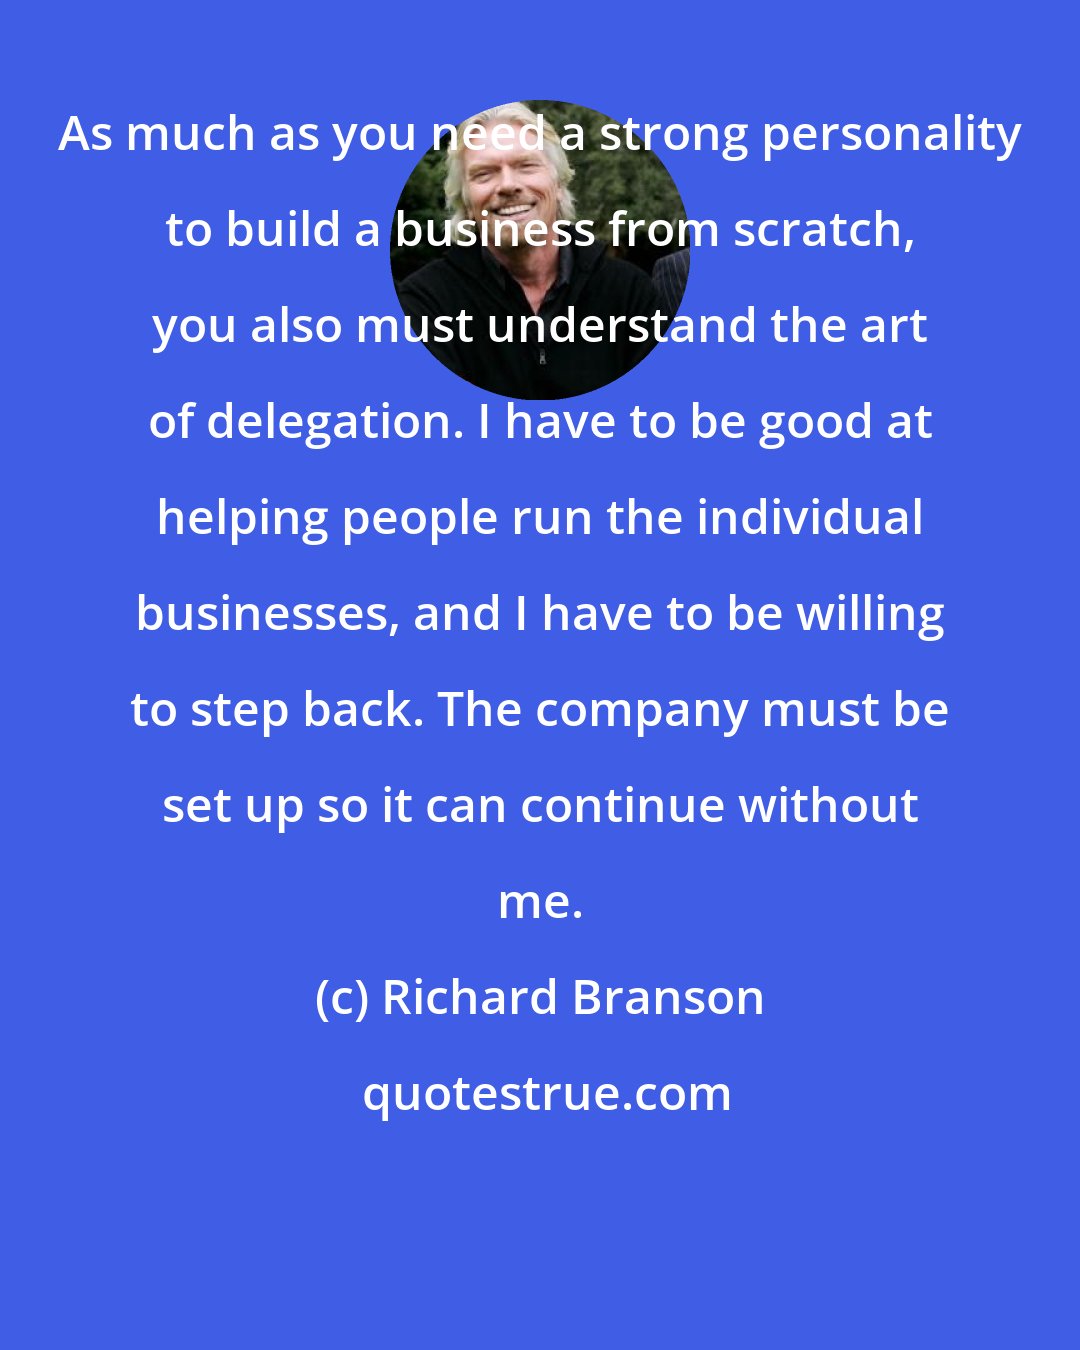 Richard Branson: As much as you need a strong personality to build a business from scratch, you also must understand the art of delegation. I have to be good at helping people run the individual businesses, and I have to be willing to step back. The company must be set up so it can continue without me.